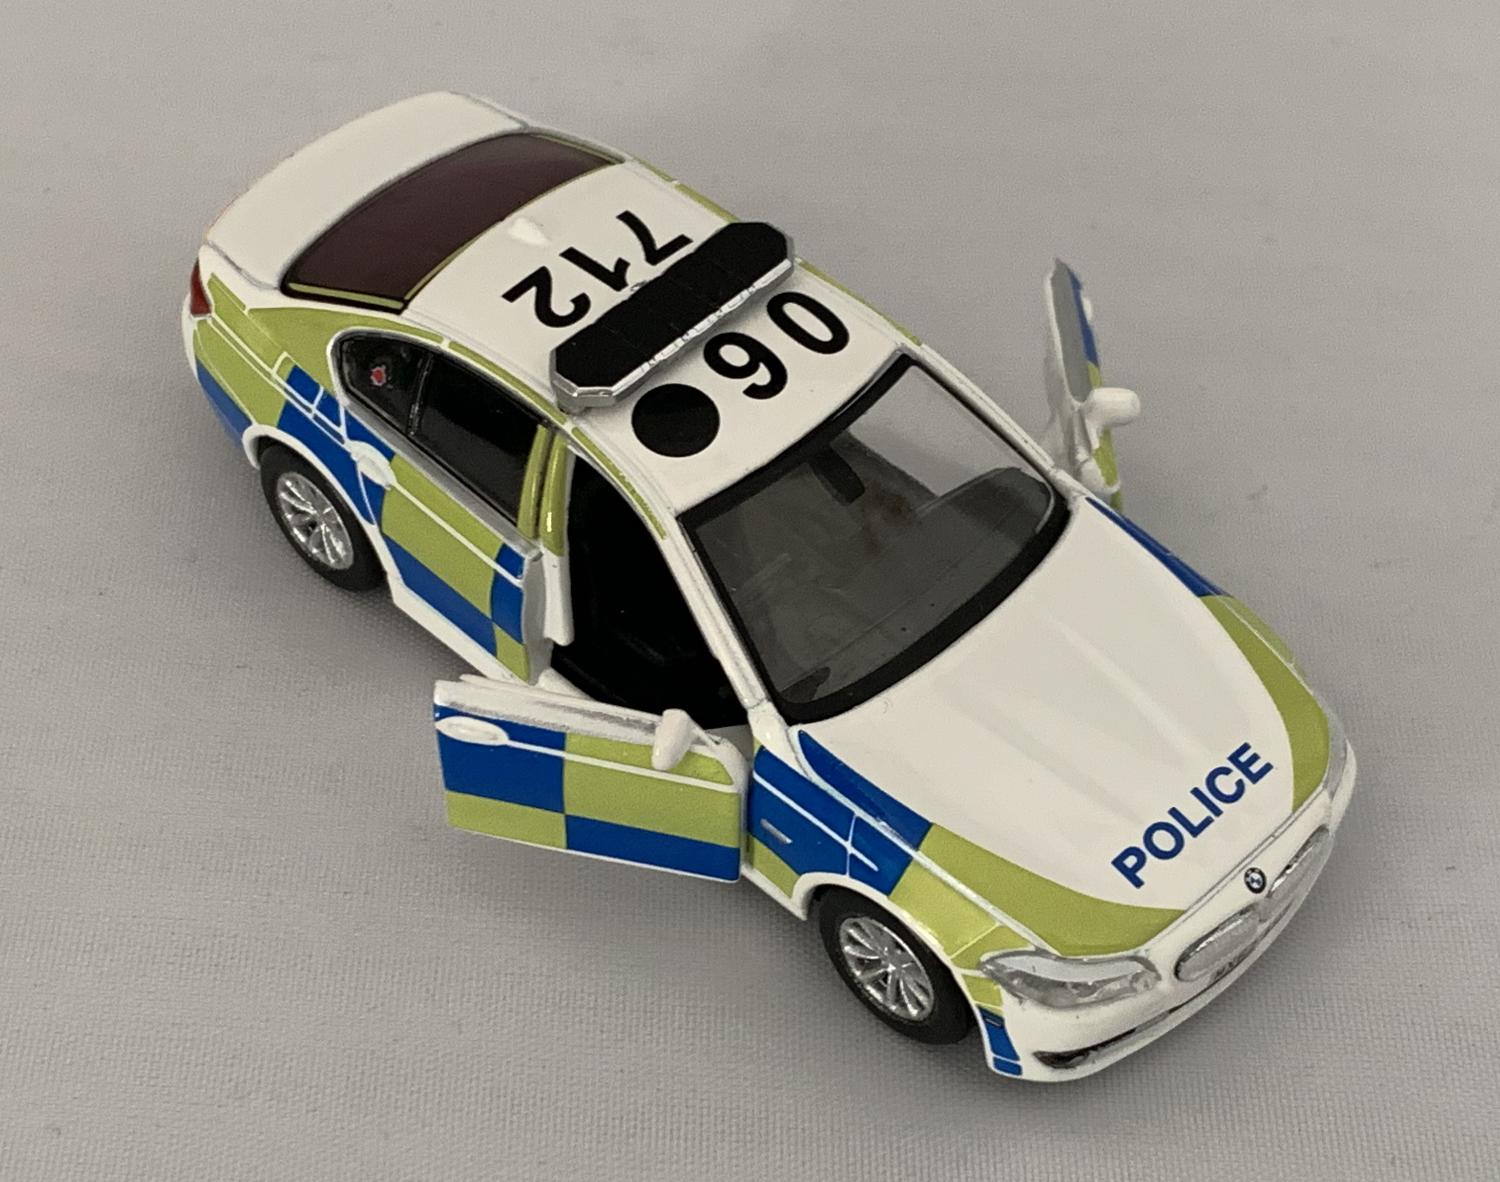 BMW 5 Series Greater Manchester Police UK7, 1:64 scale model from TINY